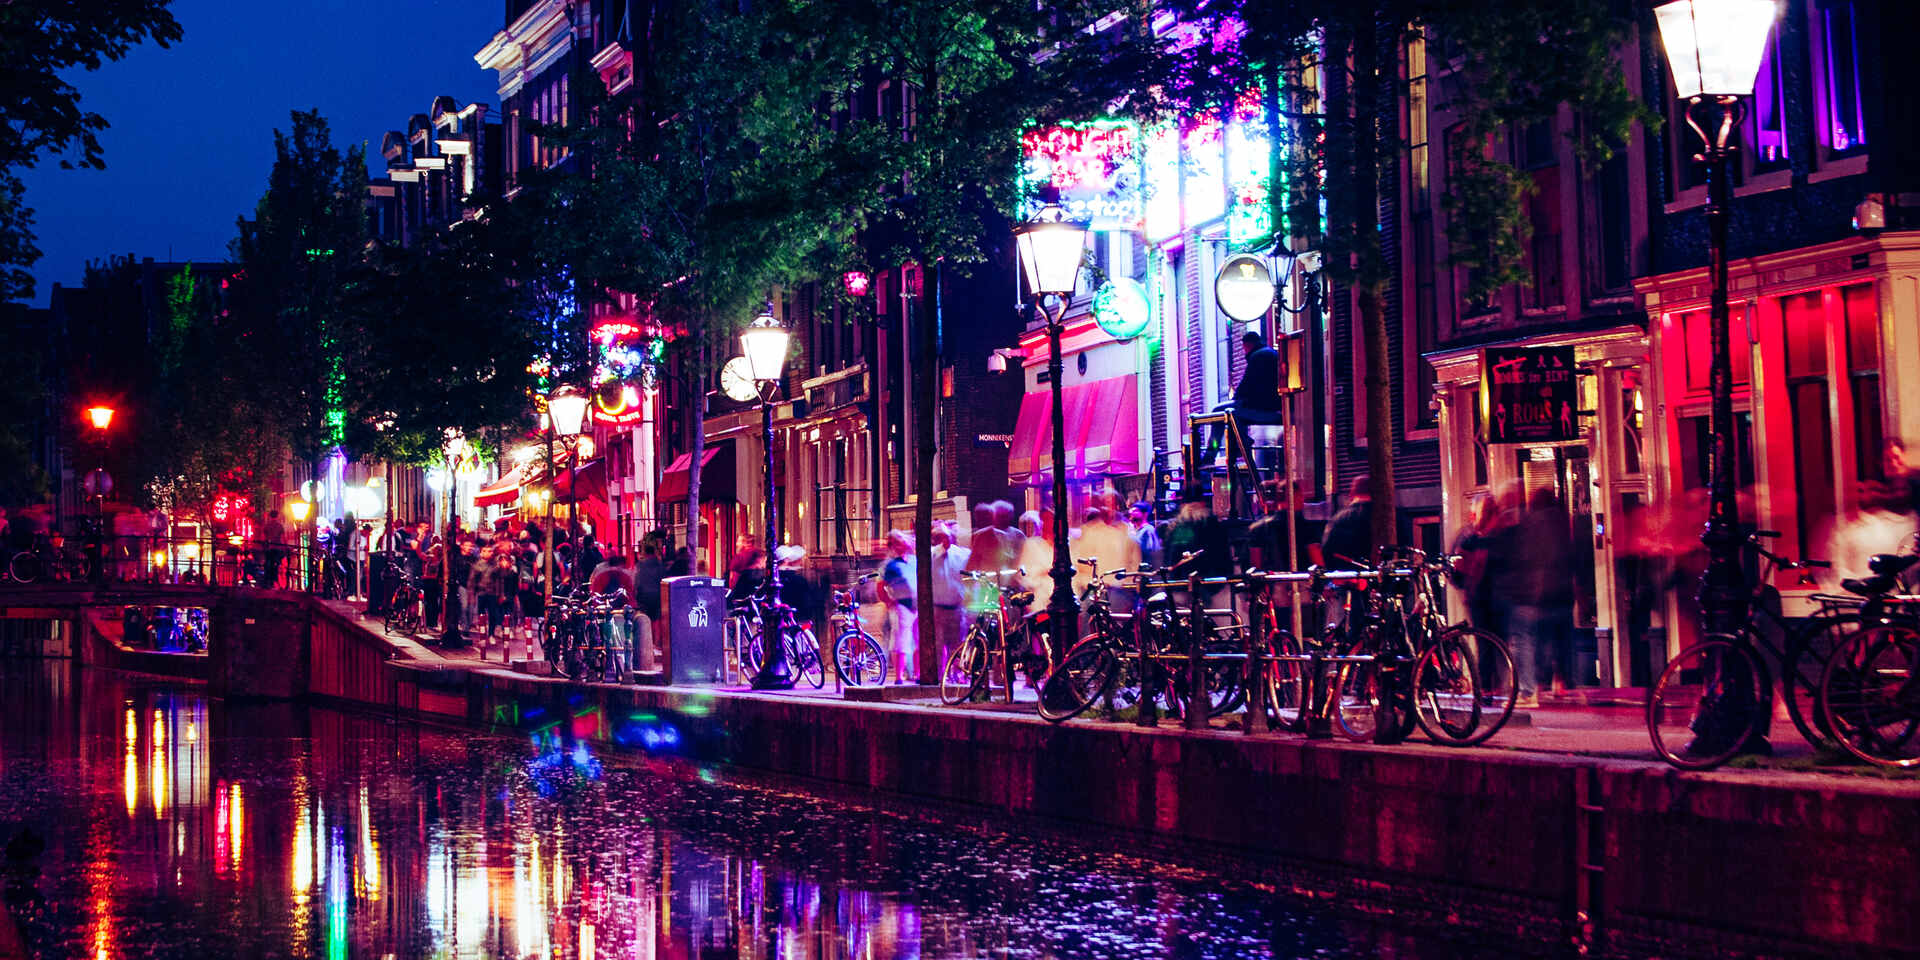 Which neighborhood in Amsterdam is famous for its artistic atmosphere and vibrant nightlife?